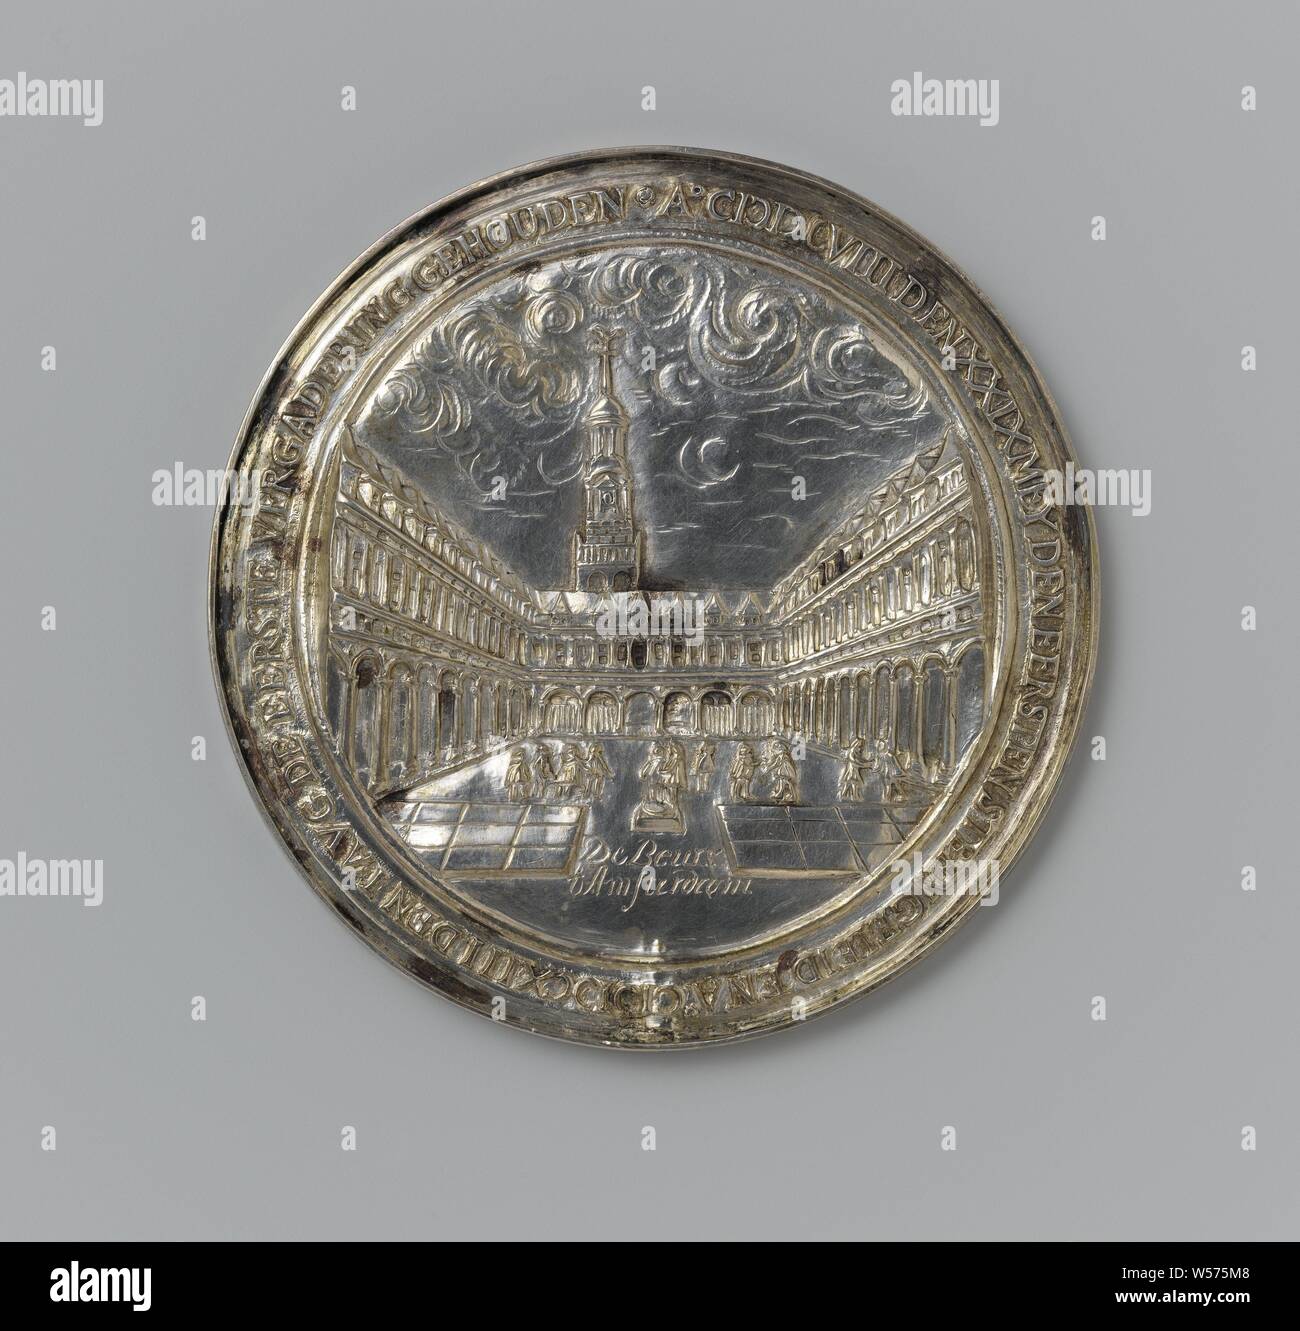 Completion of the Amsterdam stock exchange, Silver Medal. Front: newly established stock exchange building within a circular design. Reverse: inscription with crossed Mercury staff and olive branch below, Amsterdam, anonymous, c. 1400 - c. 1885, silver (metal), engraving, d 7 cm × w 54.70 Stock Photo